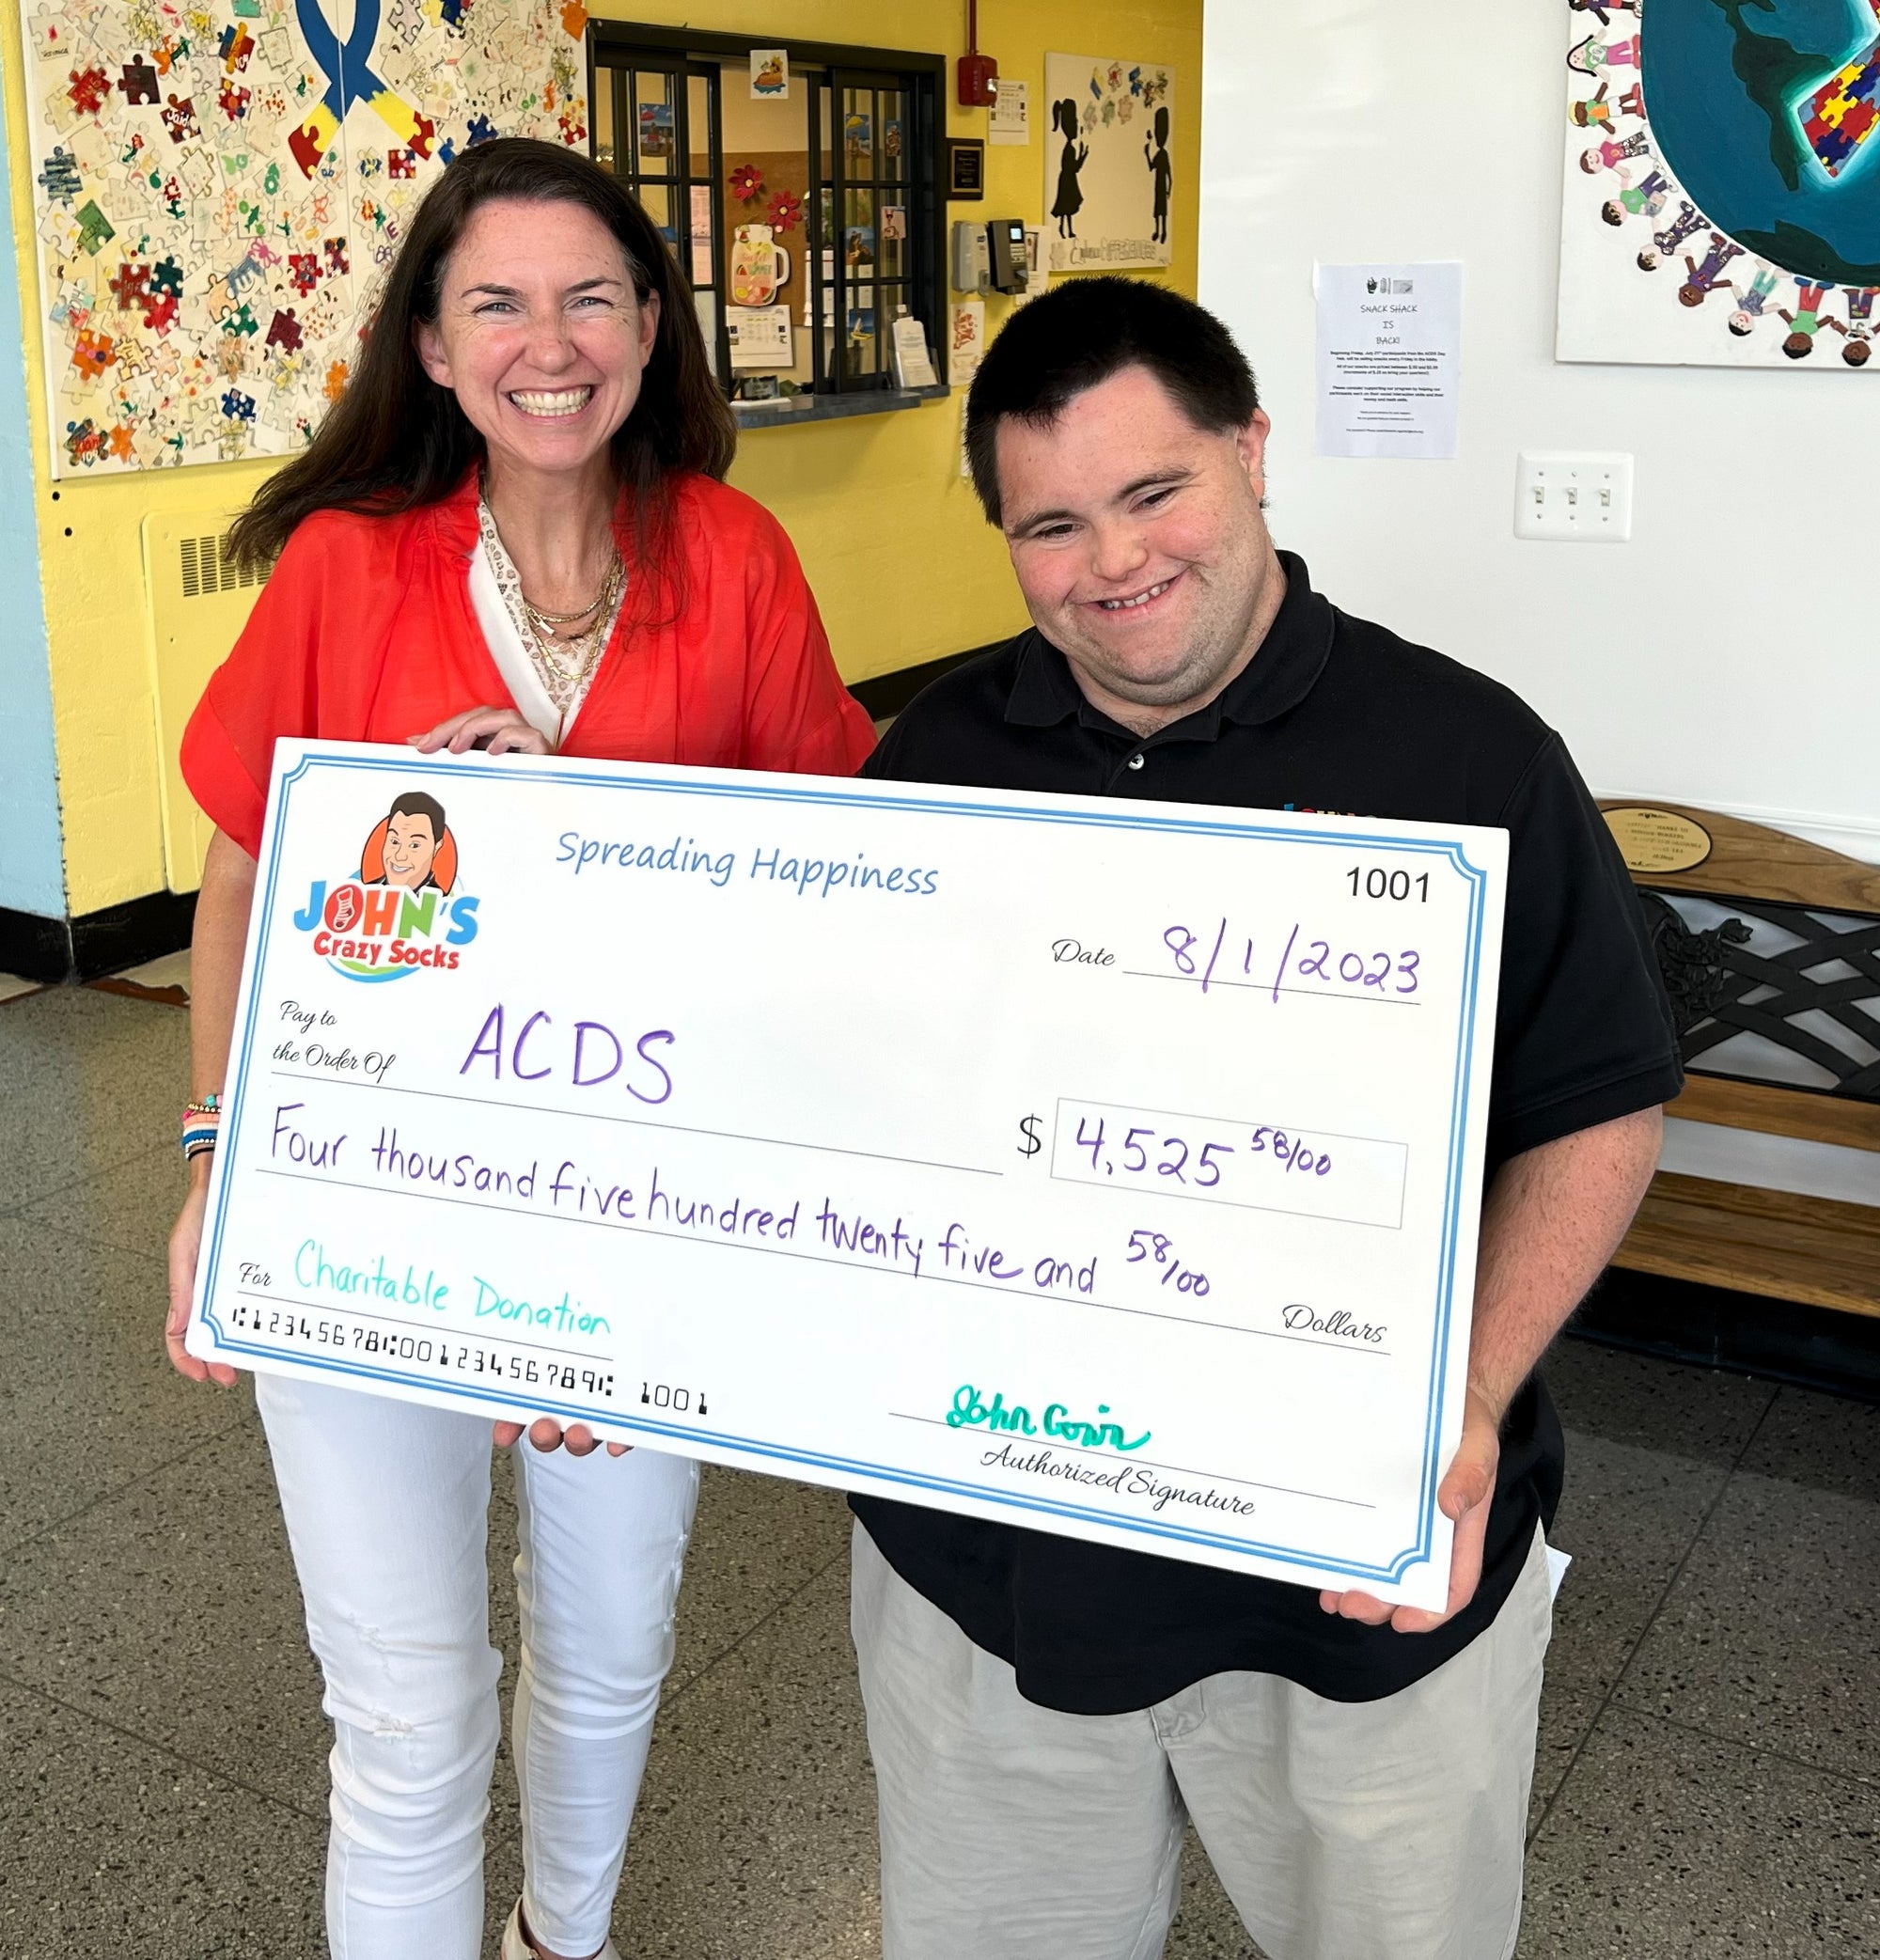 John Cronin Visits His Pre-School Alma Mater ACDS and Delivers a Donation